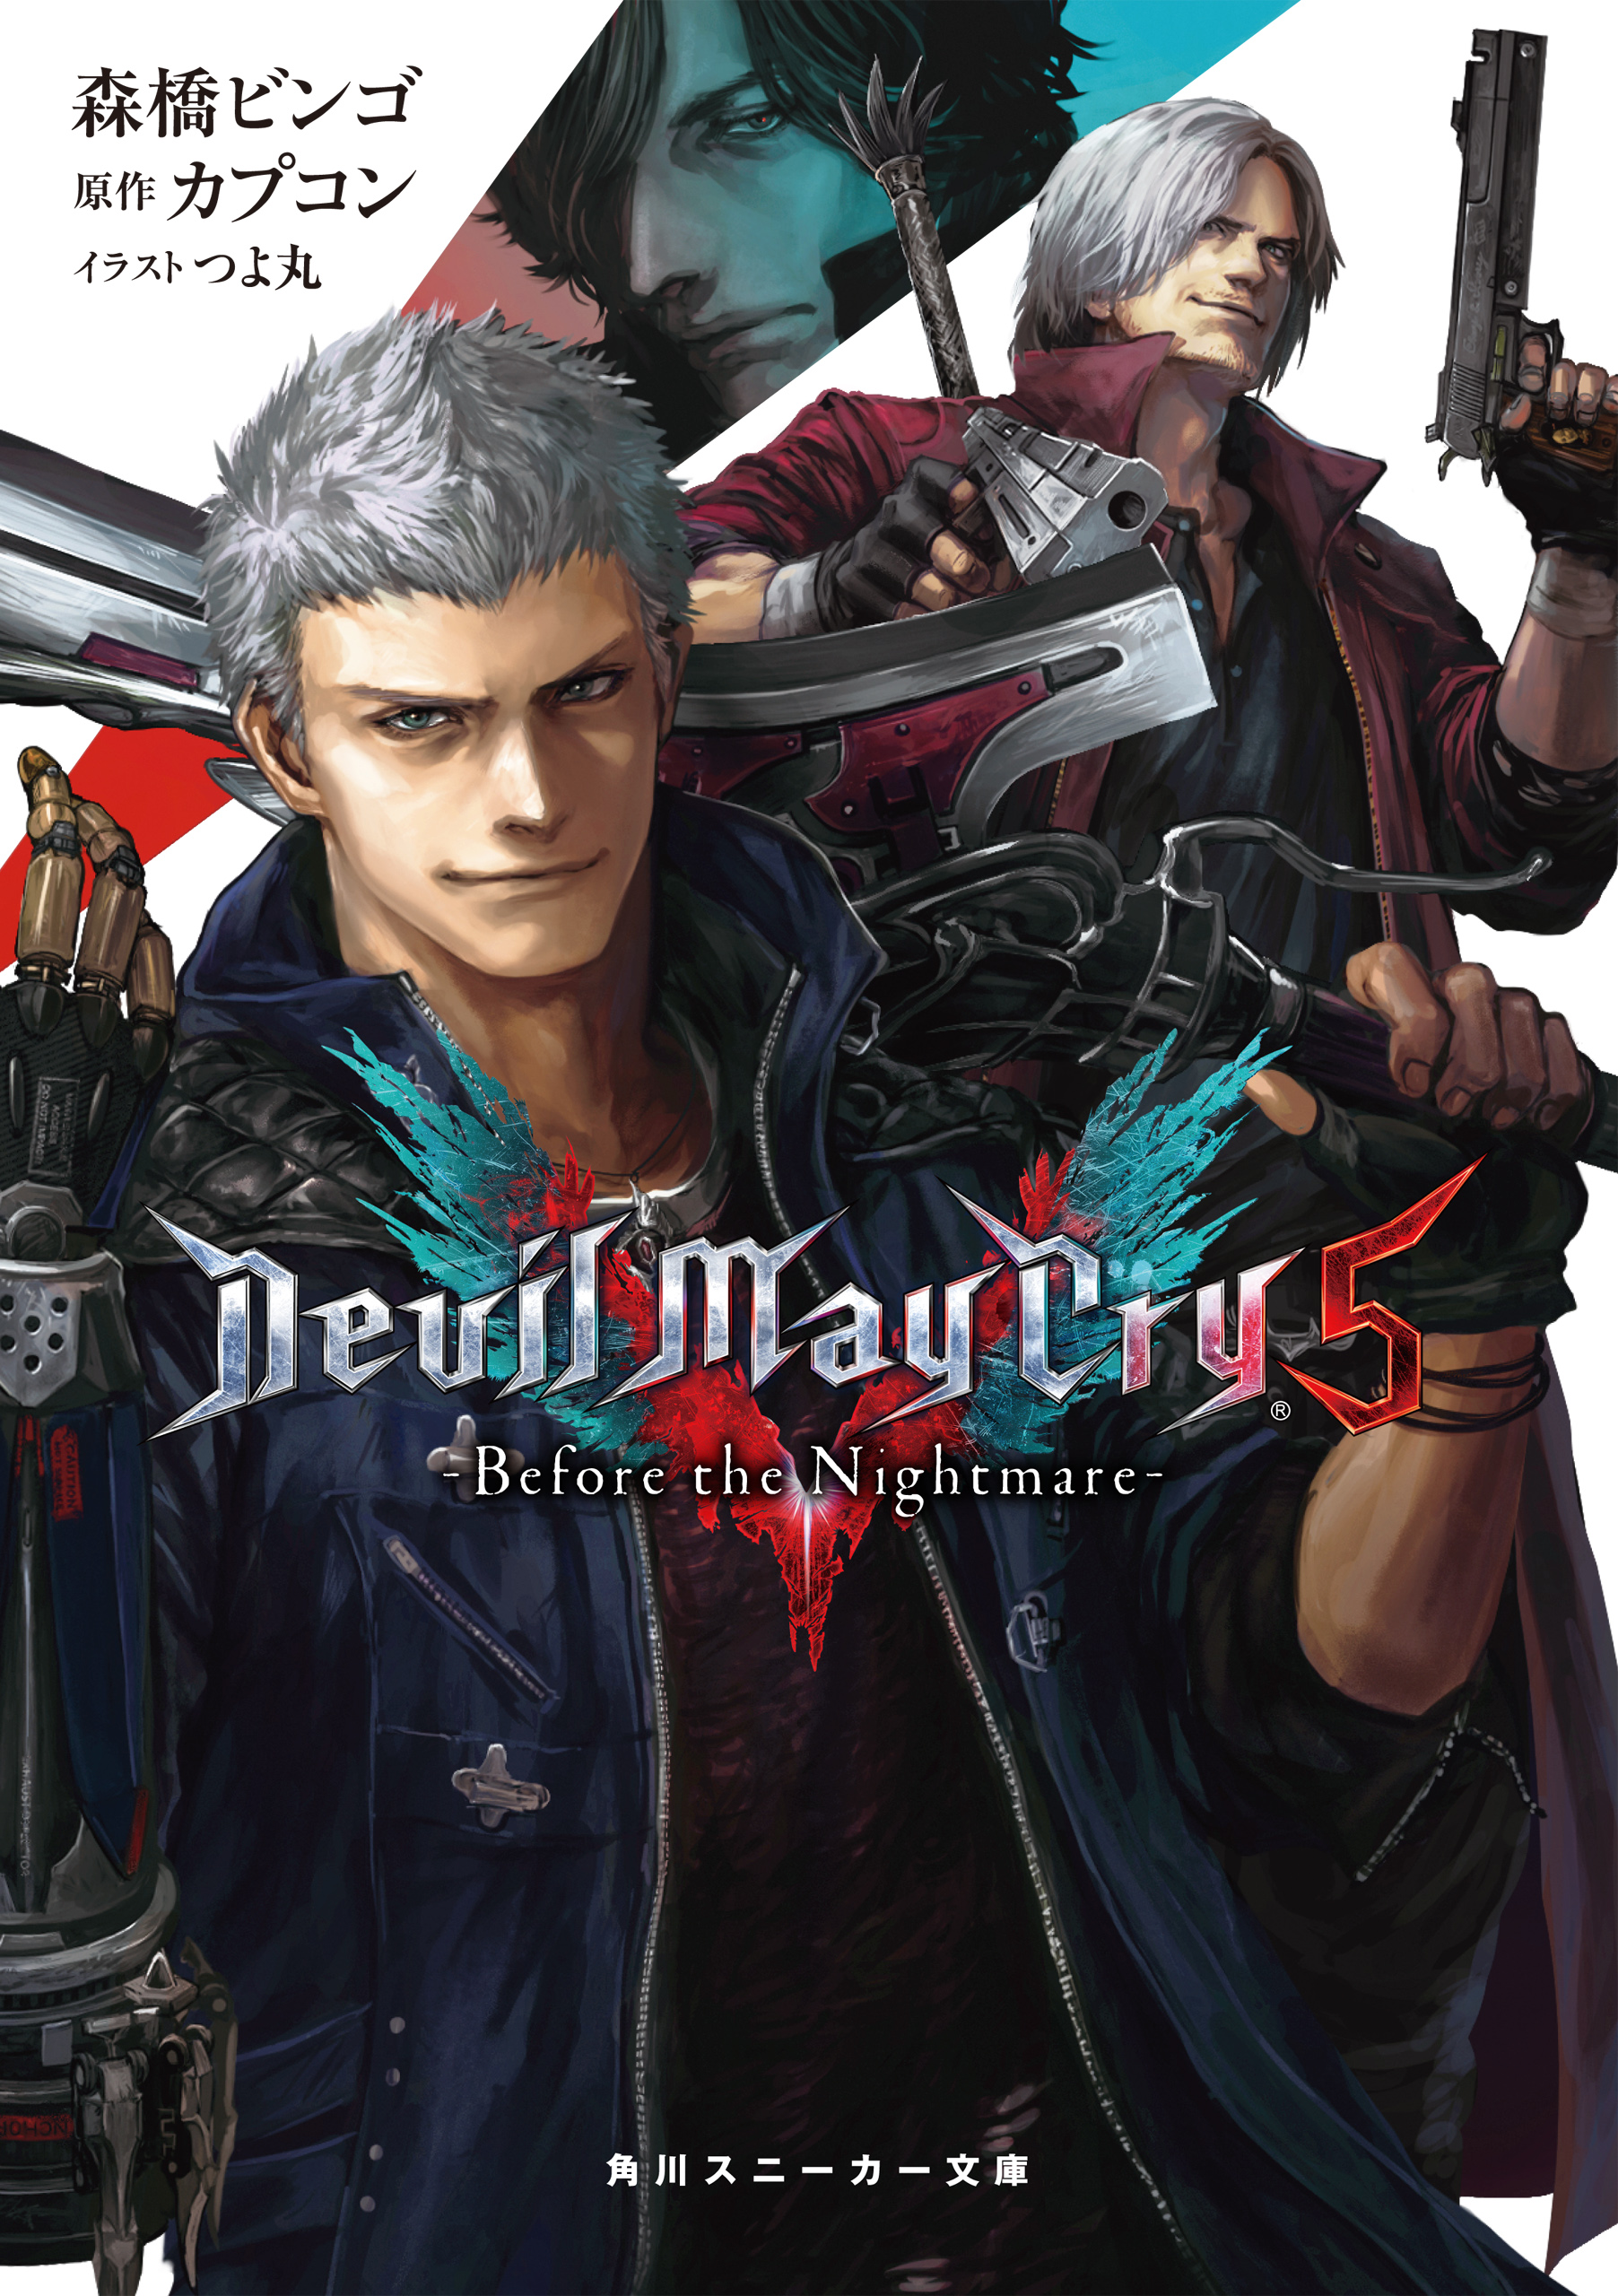 Devil May Cry 5 ‐Before the Nightmare‐ - 森橋ビンゴ/カプコン 